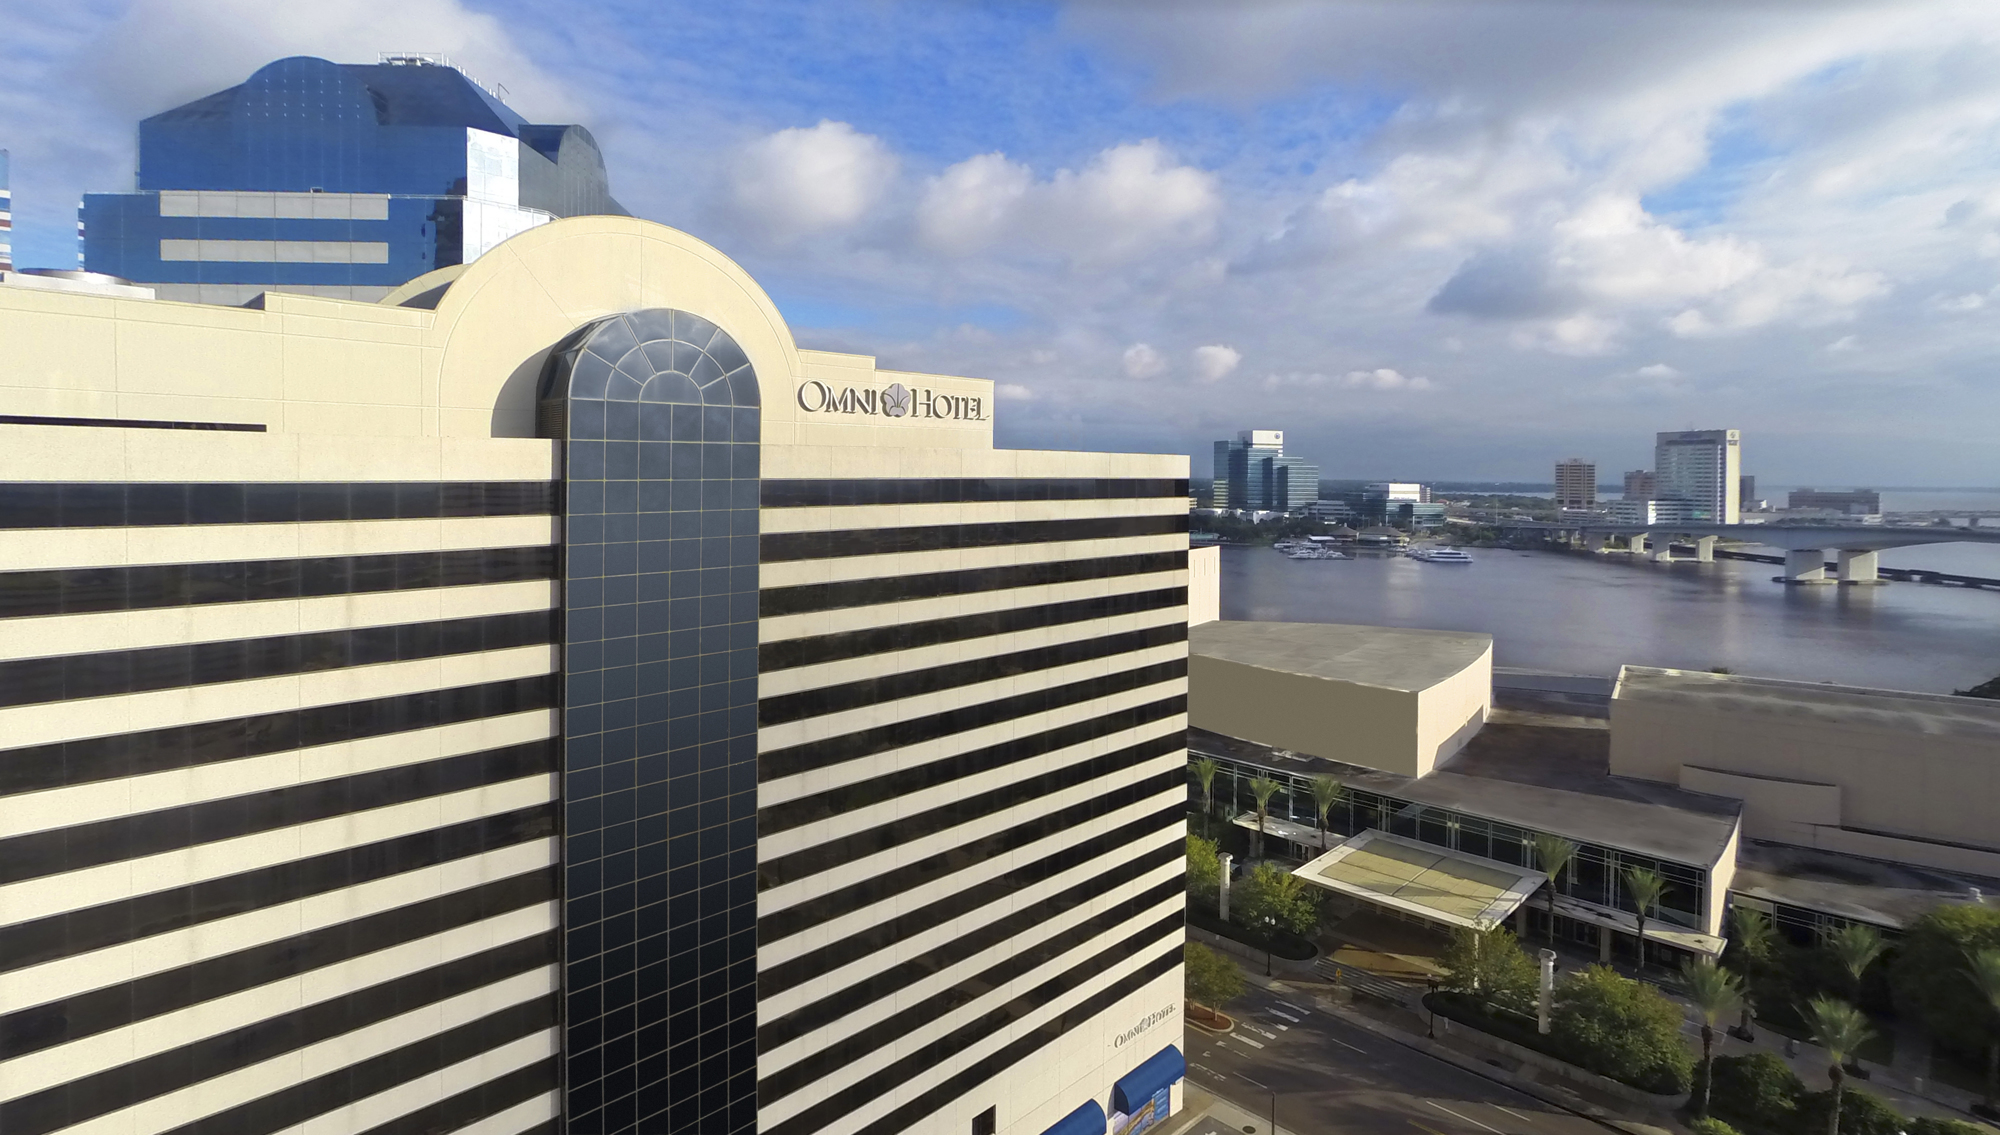 The Omni Jacksonville Hotel was sold Feb. 25.